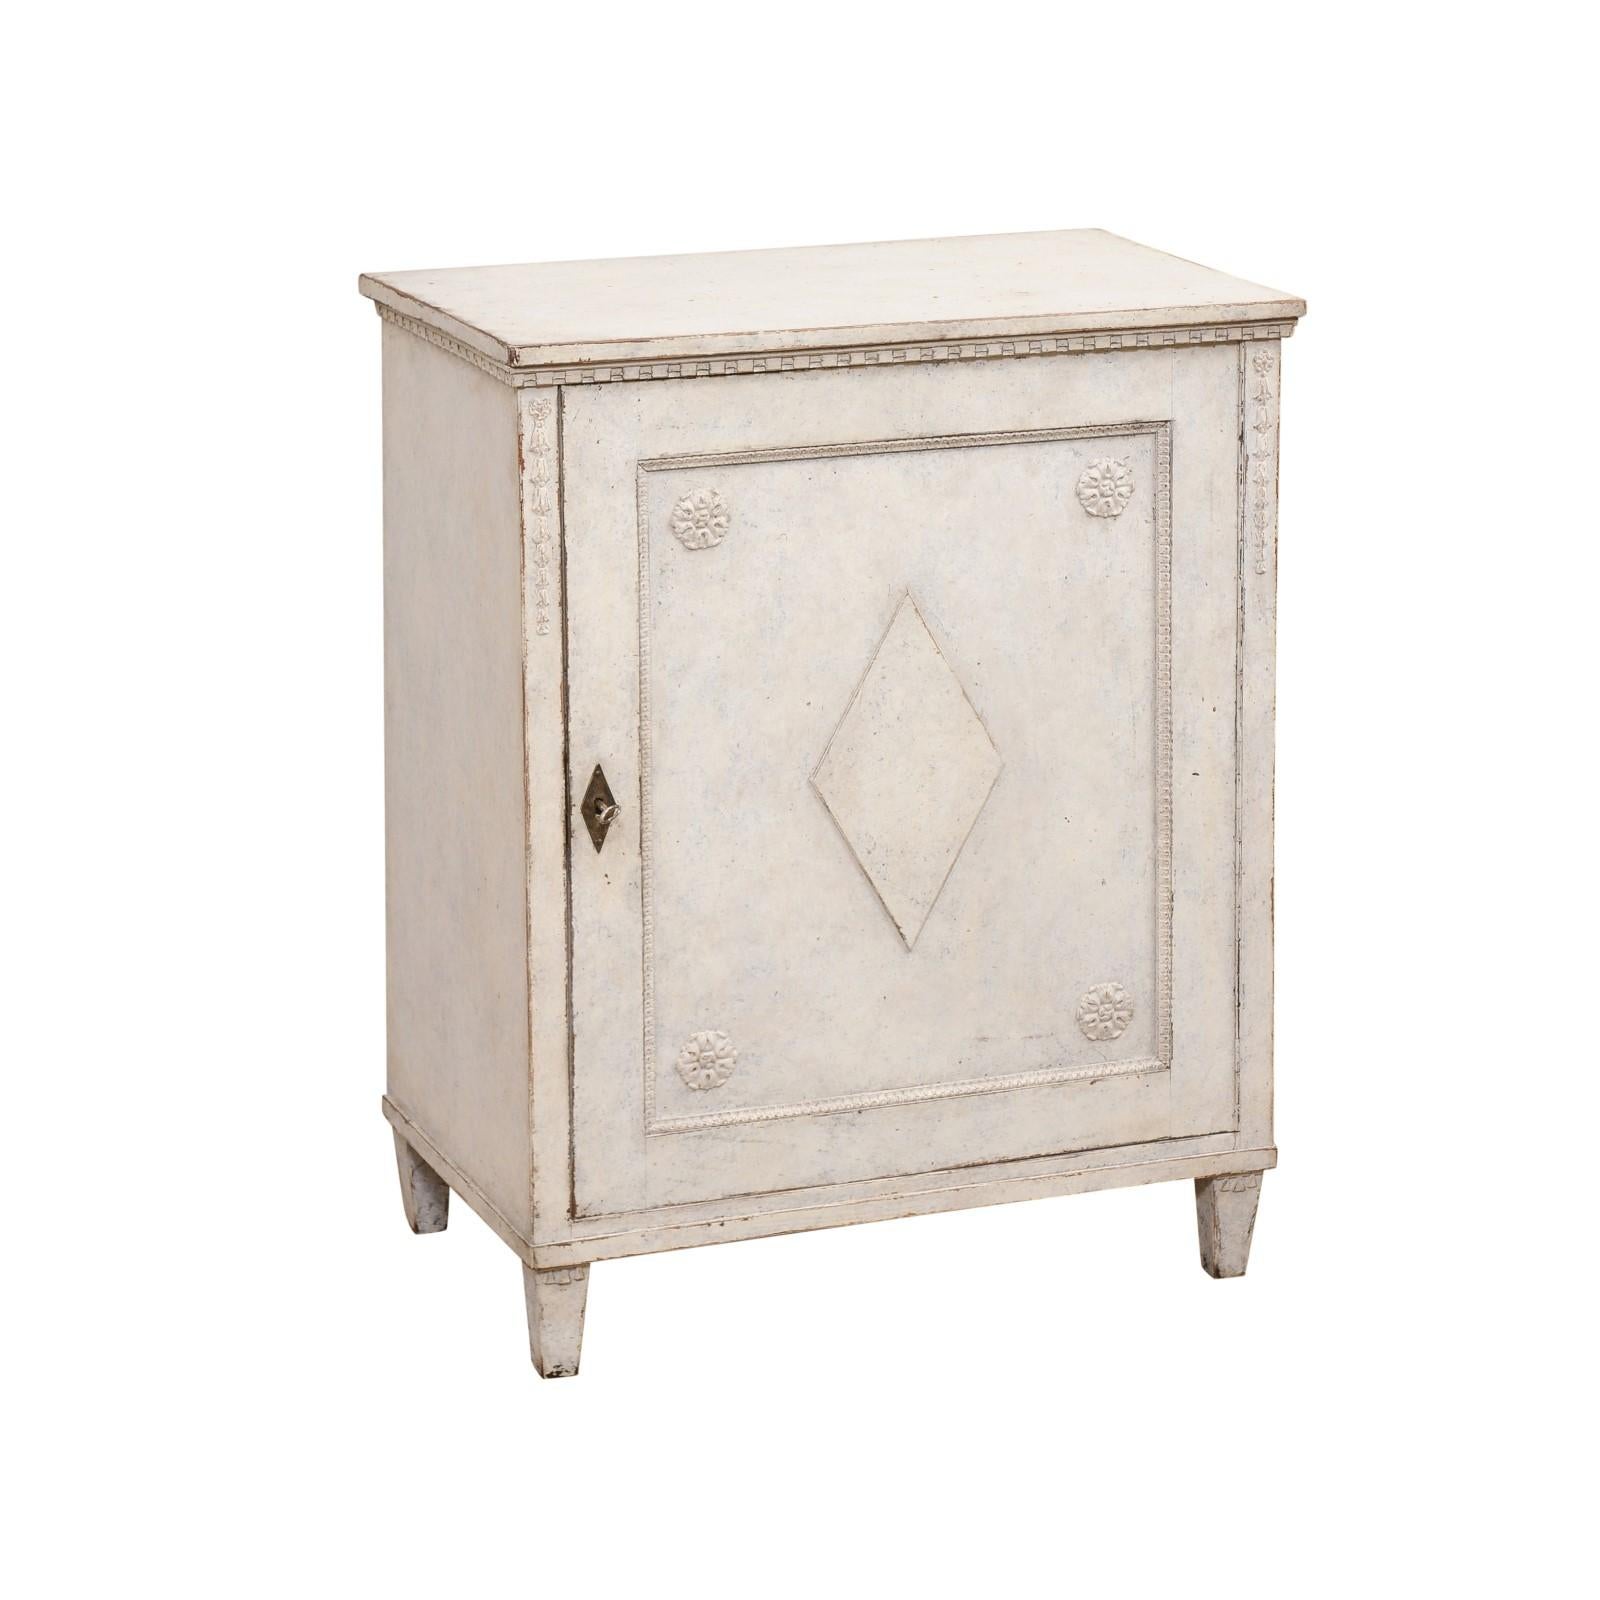 A Swedish Gustavian style painted wood cabinet from the late 19th century, with single door, carved rosettes, diamond motifs and dentil molding. Created in Sweden during the last quarter of the 19th century, this painted cabinet features a